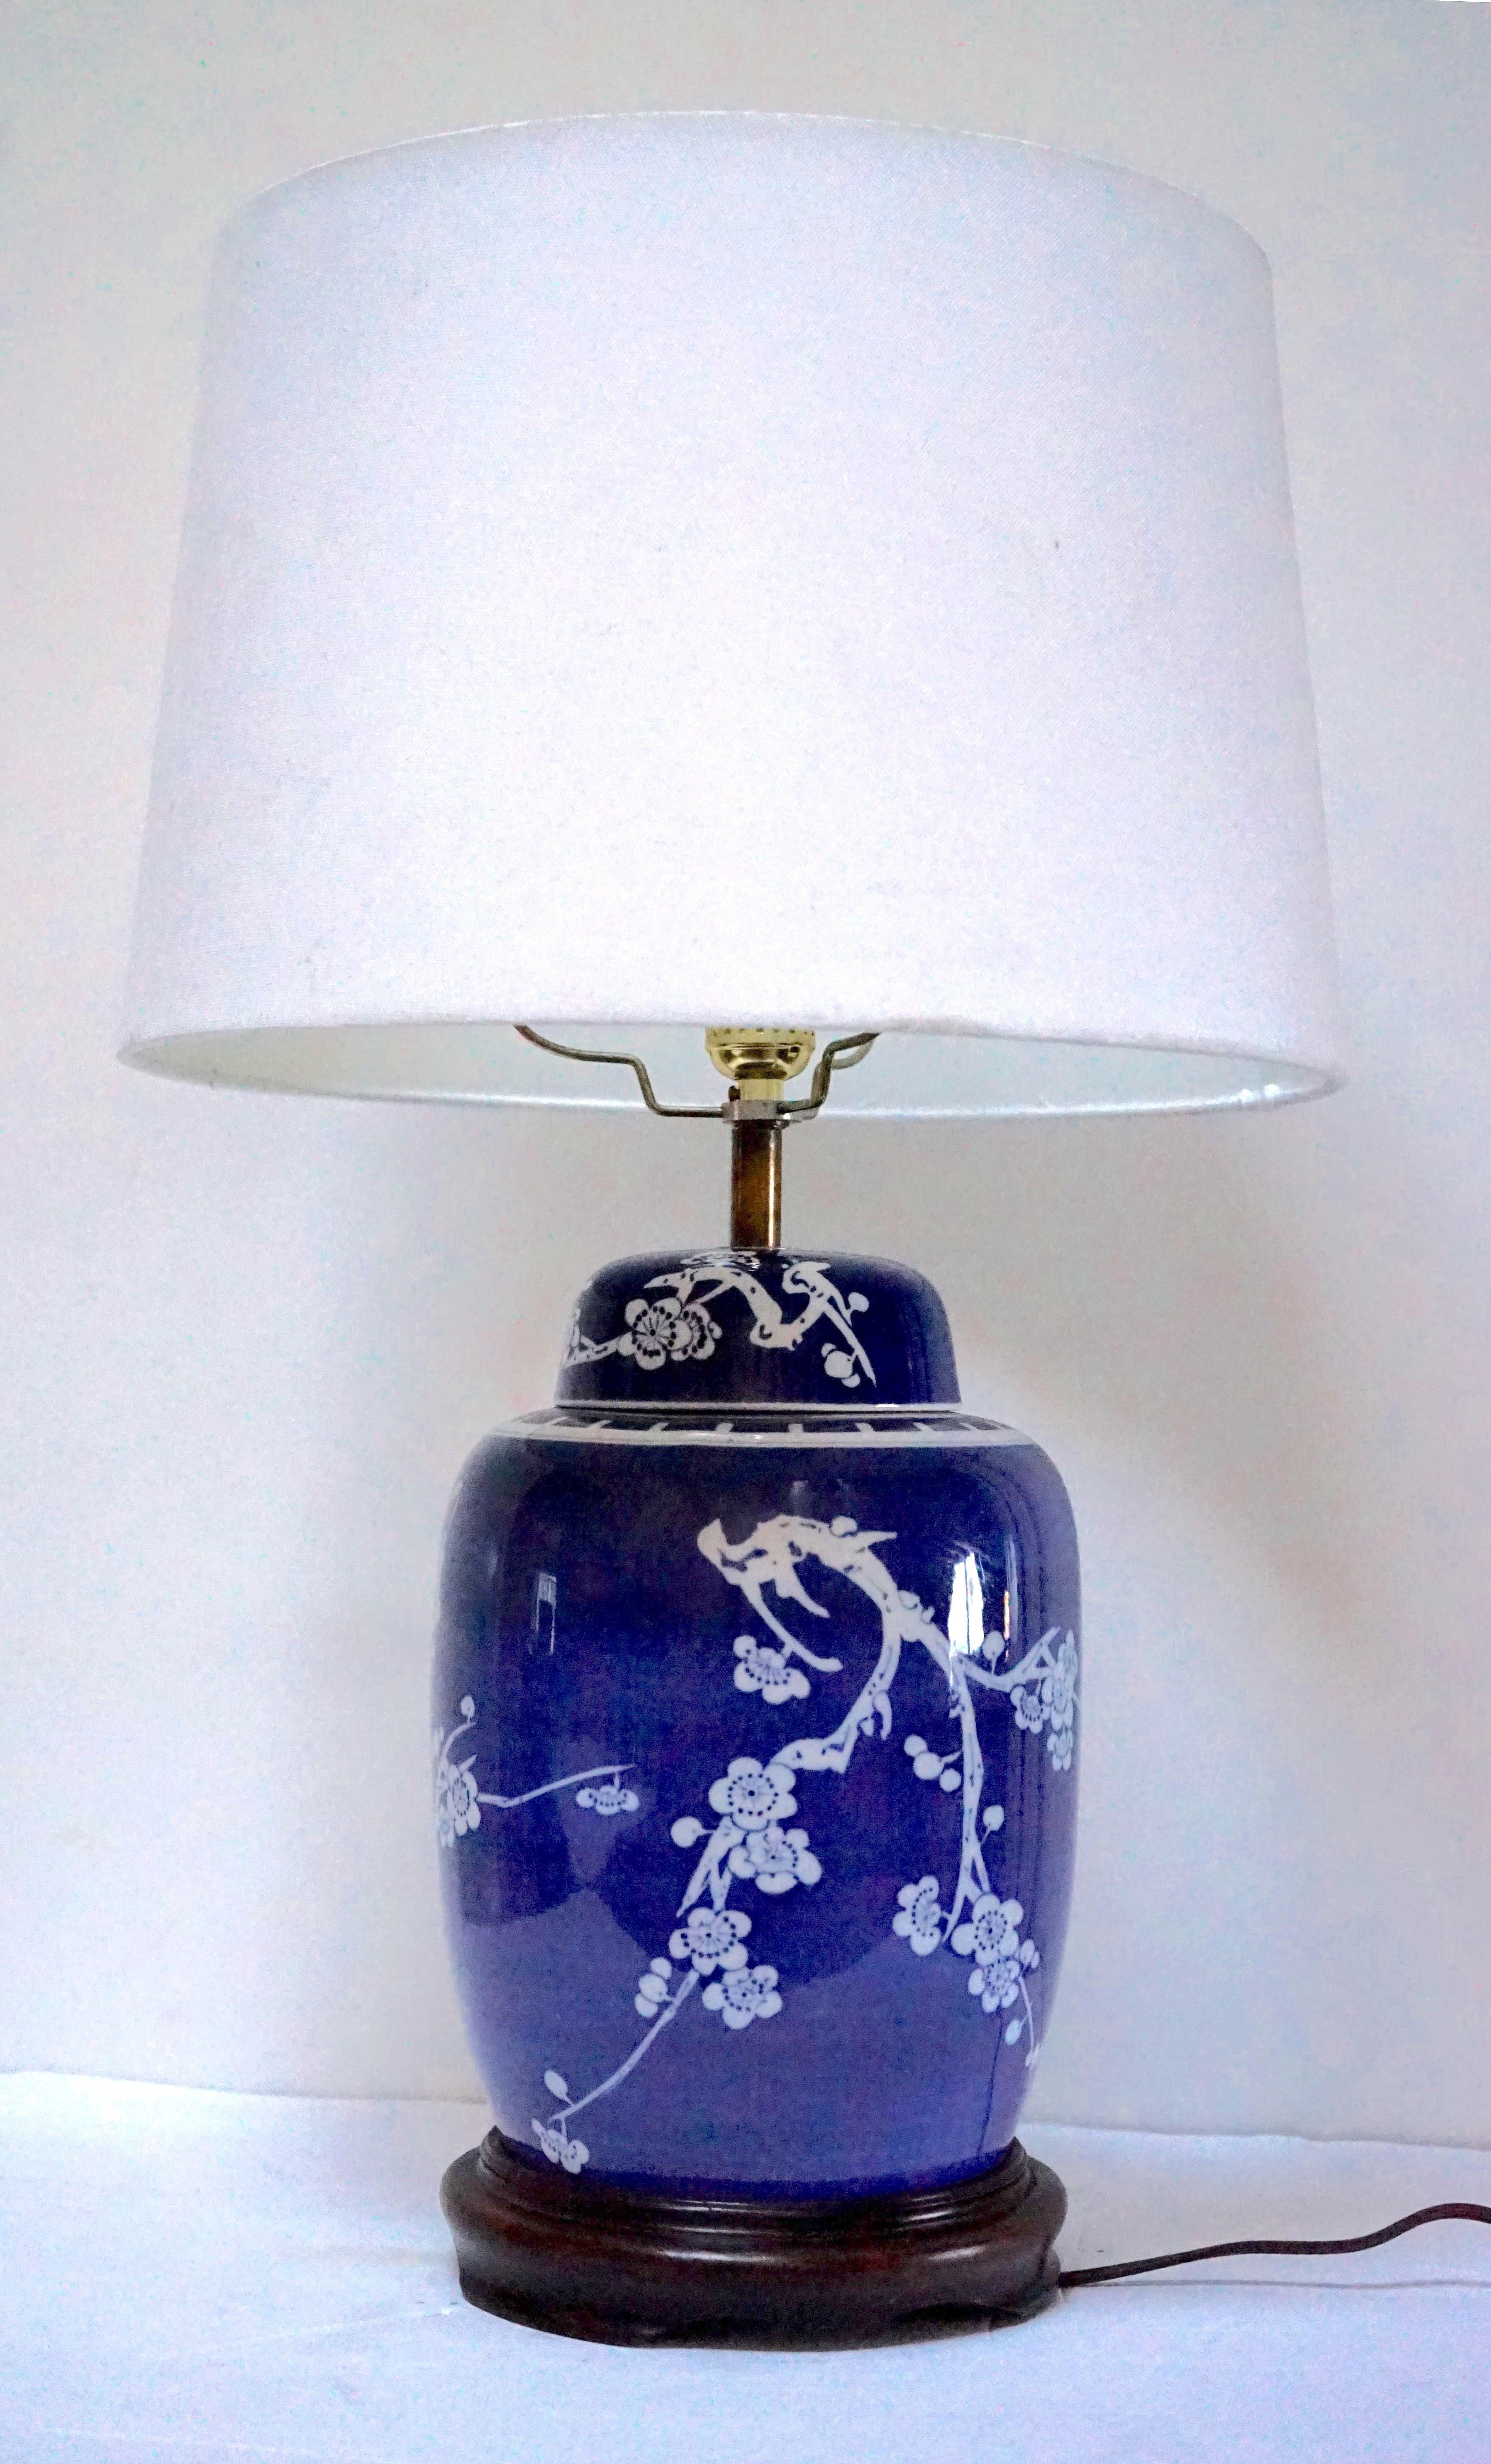 20th Century Cobalt Blue and White Prunus Cherry Blossom Vintage Table Lamp on Walnut Stand